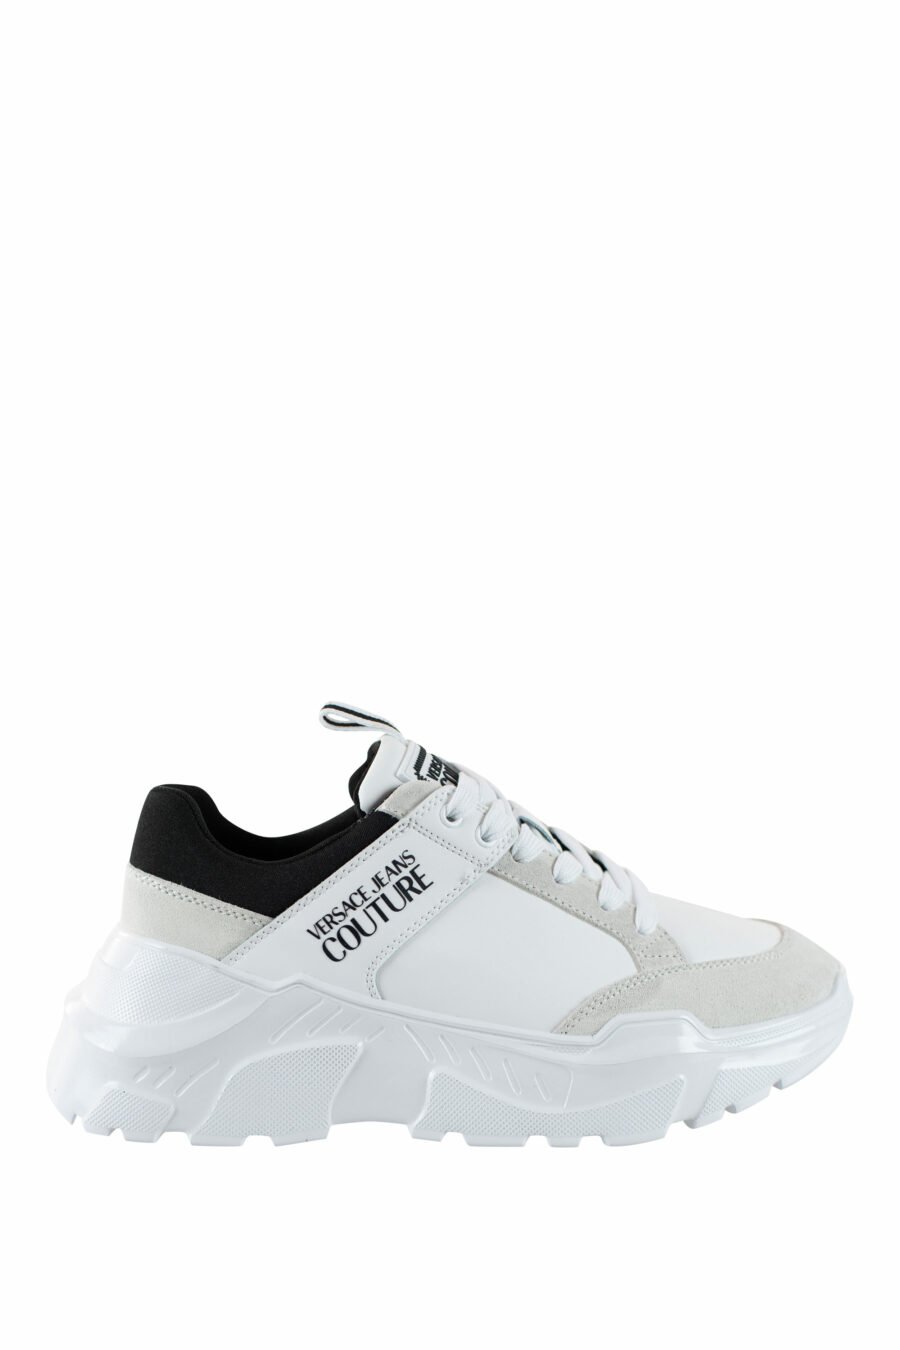 Versace Jeans Couture White Barocco Court 88 Sneakers – BlackSkinny